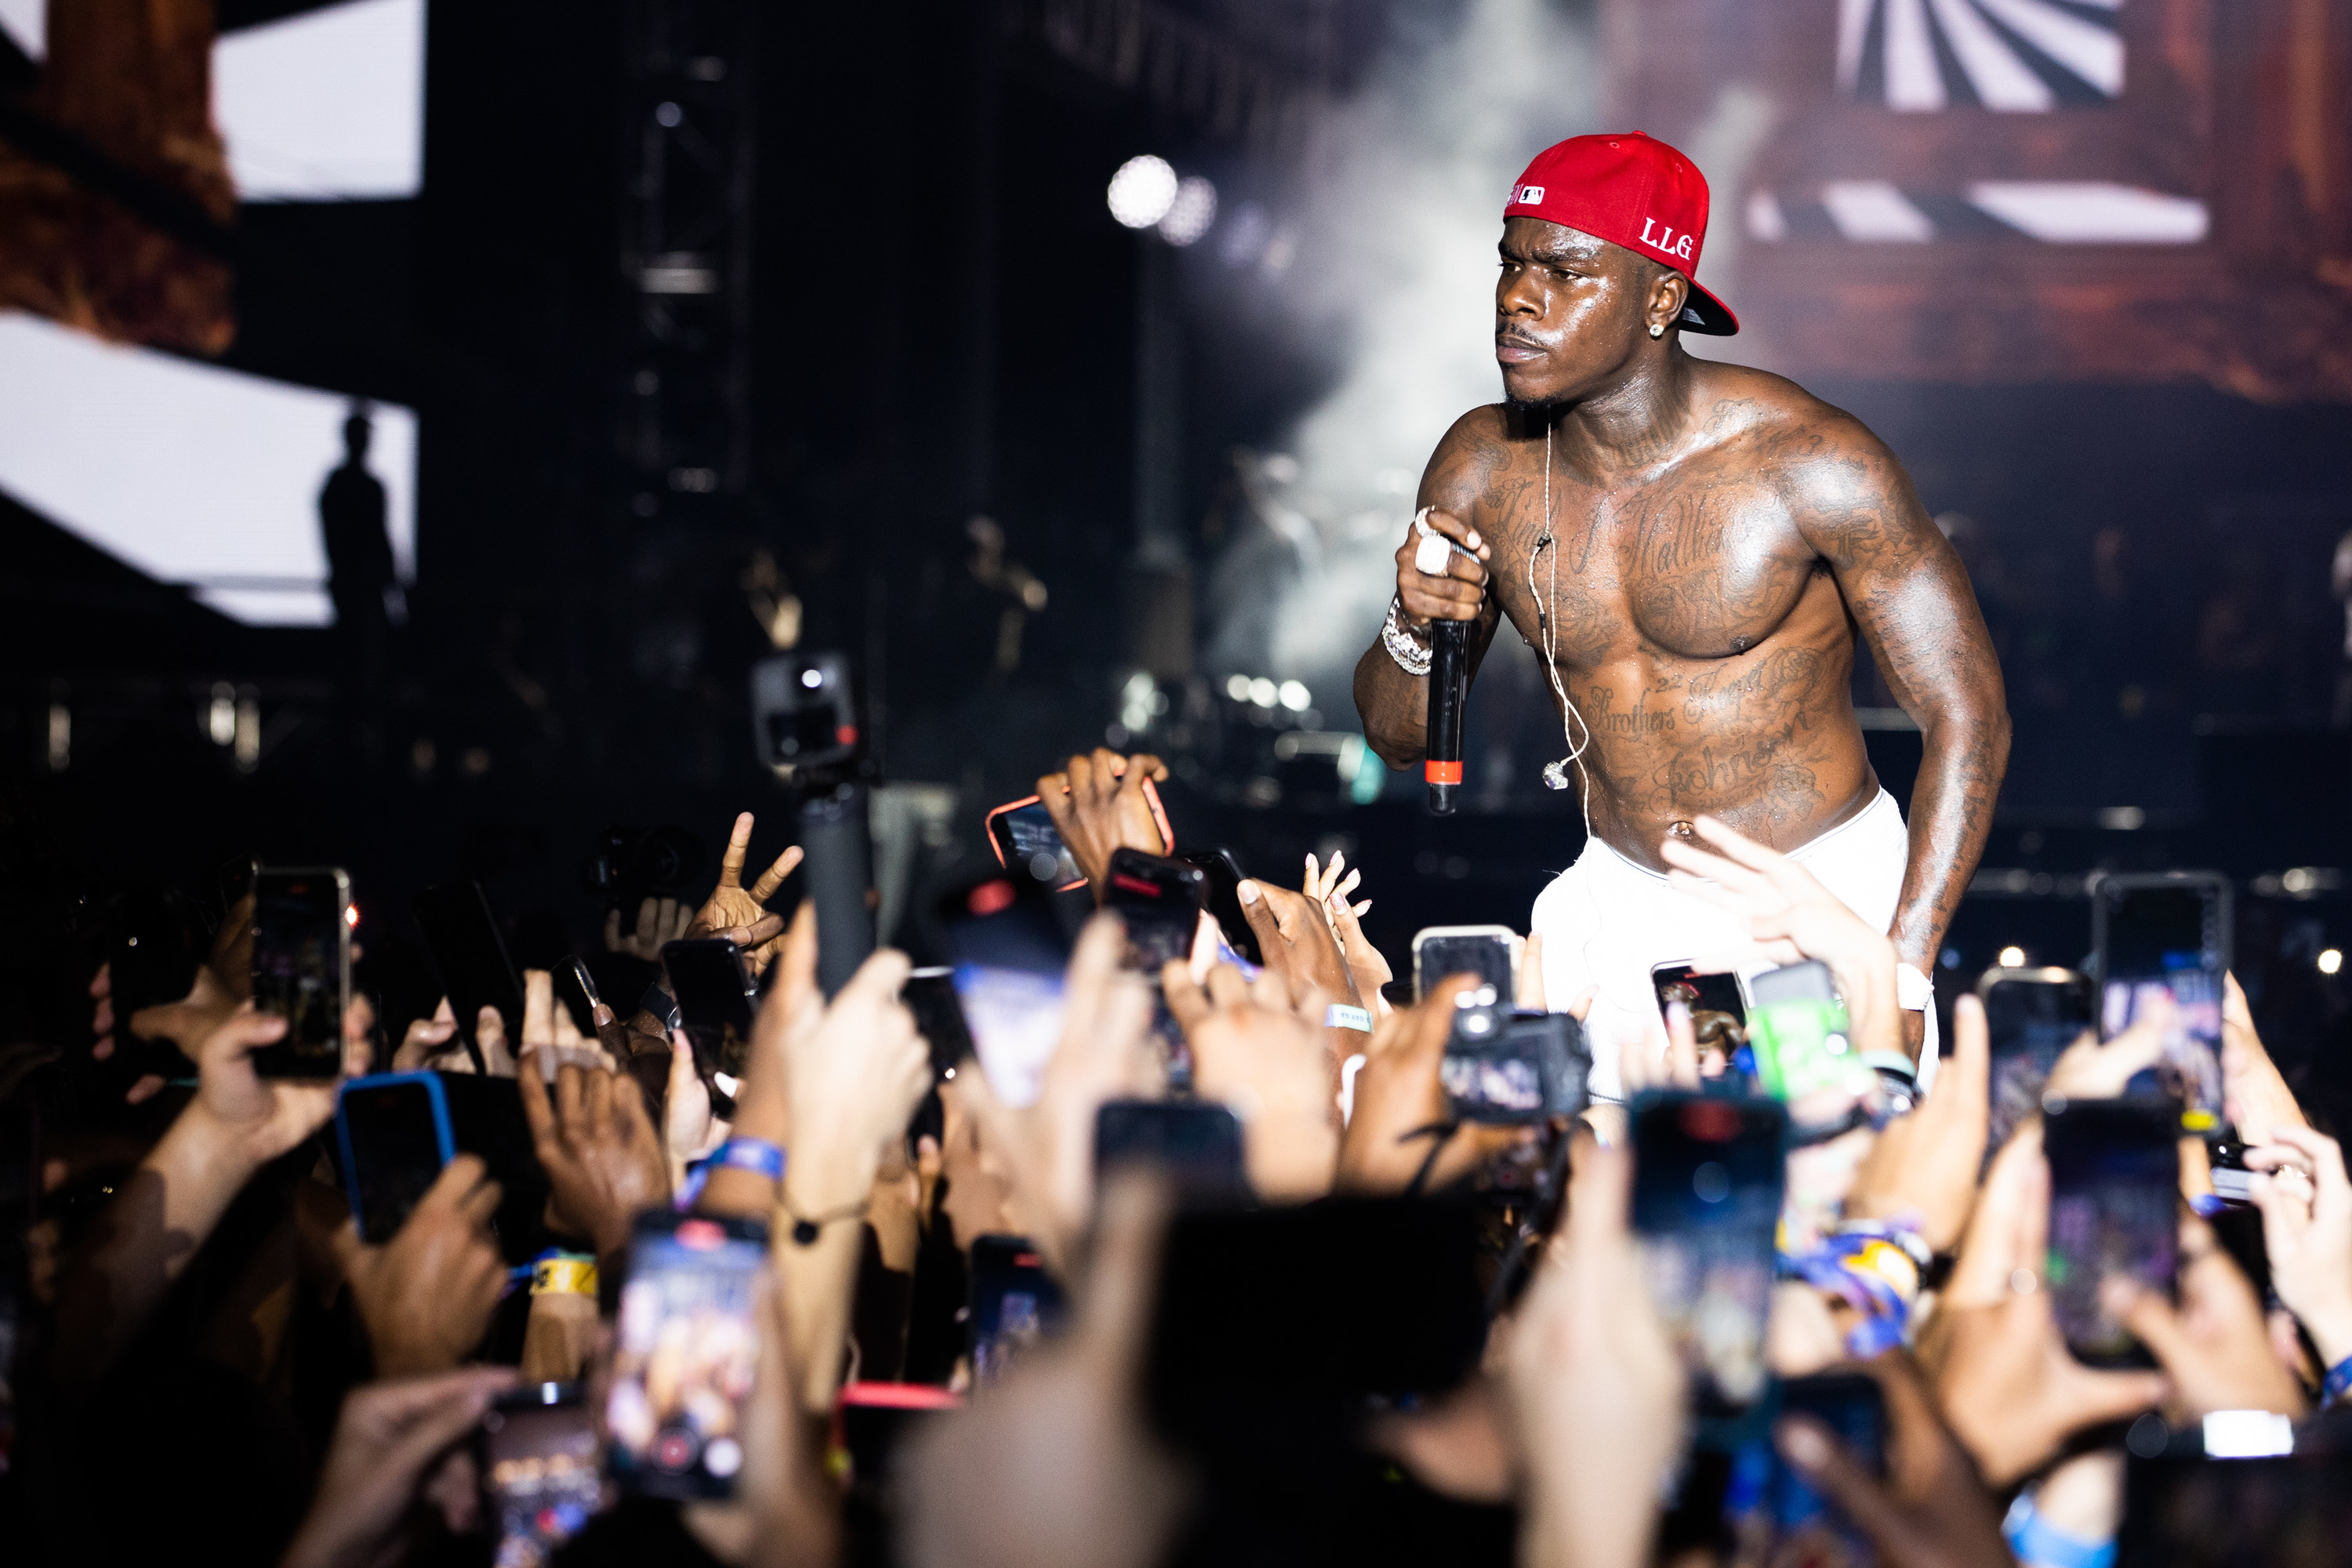 DaBaby performing shirtless on stage